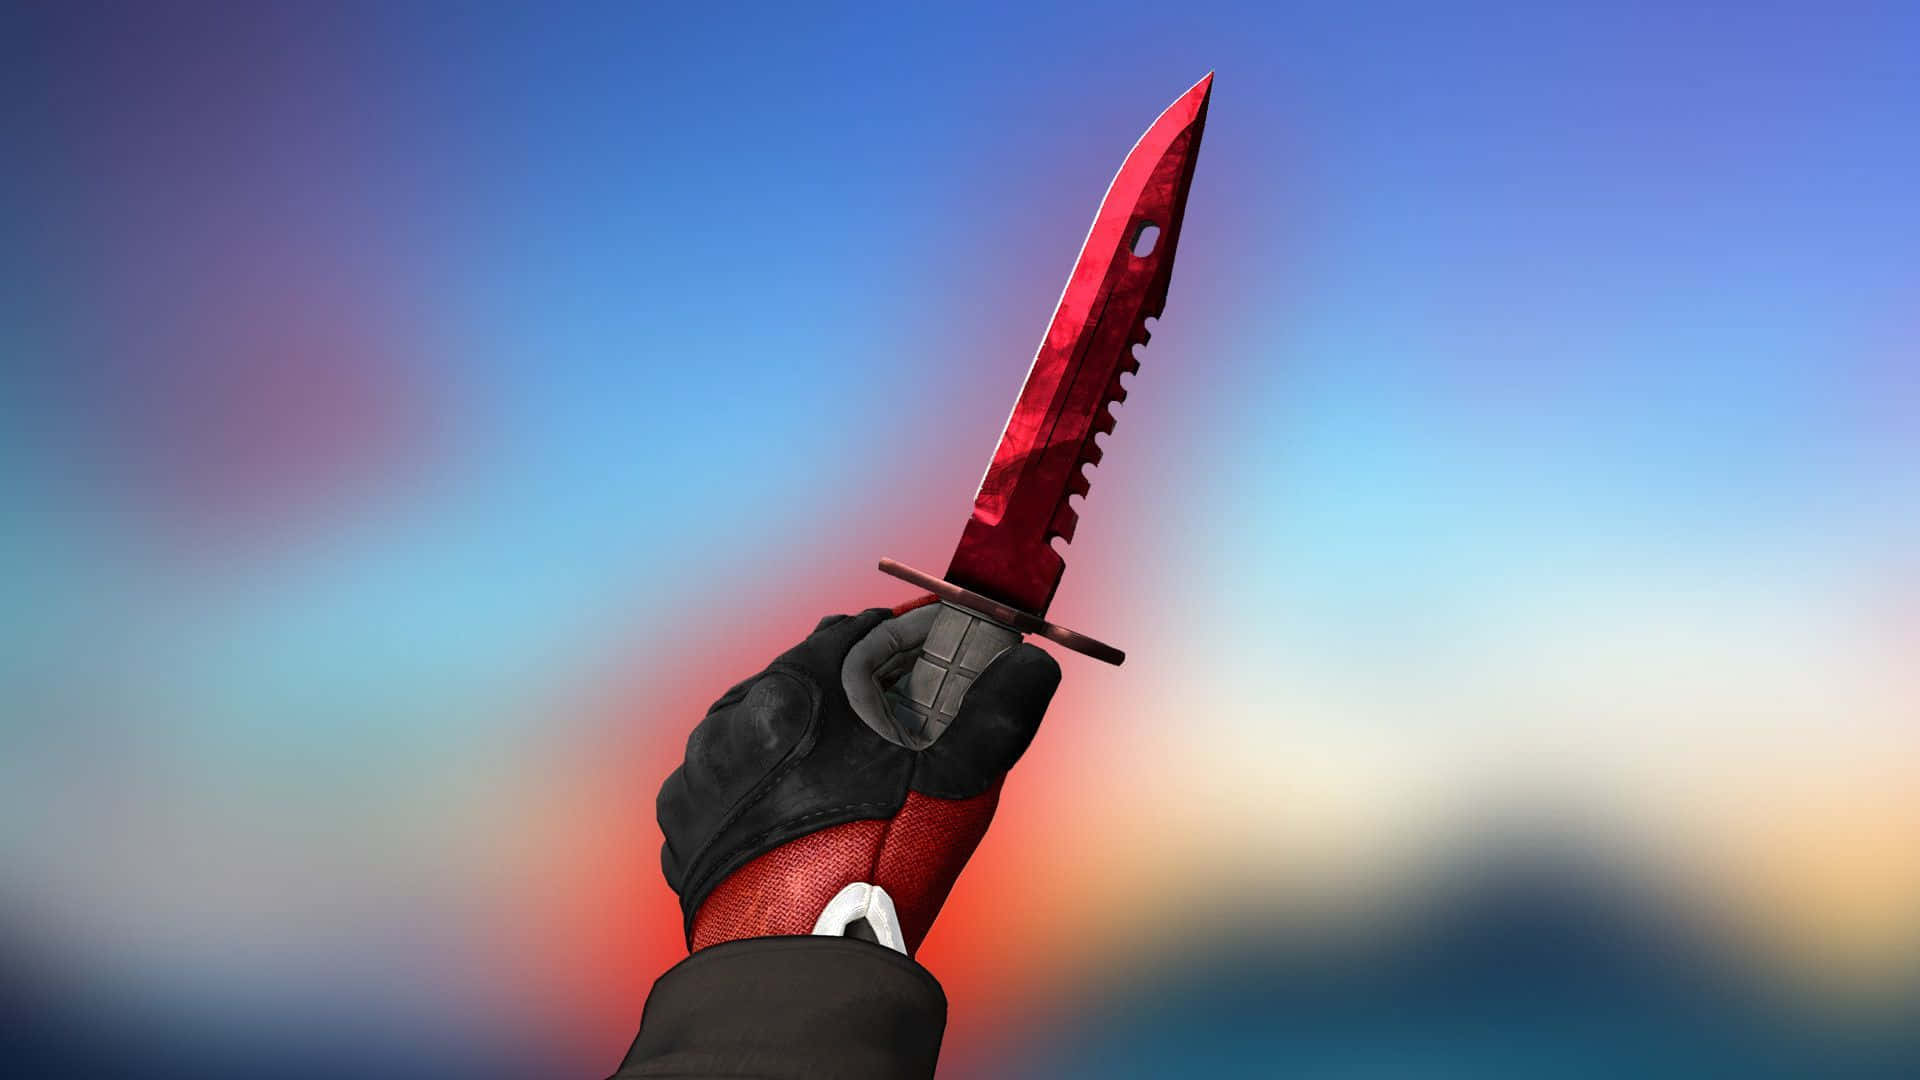 A Red Knife Is Held Up In A Hand